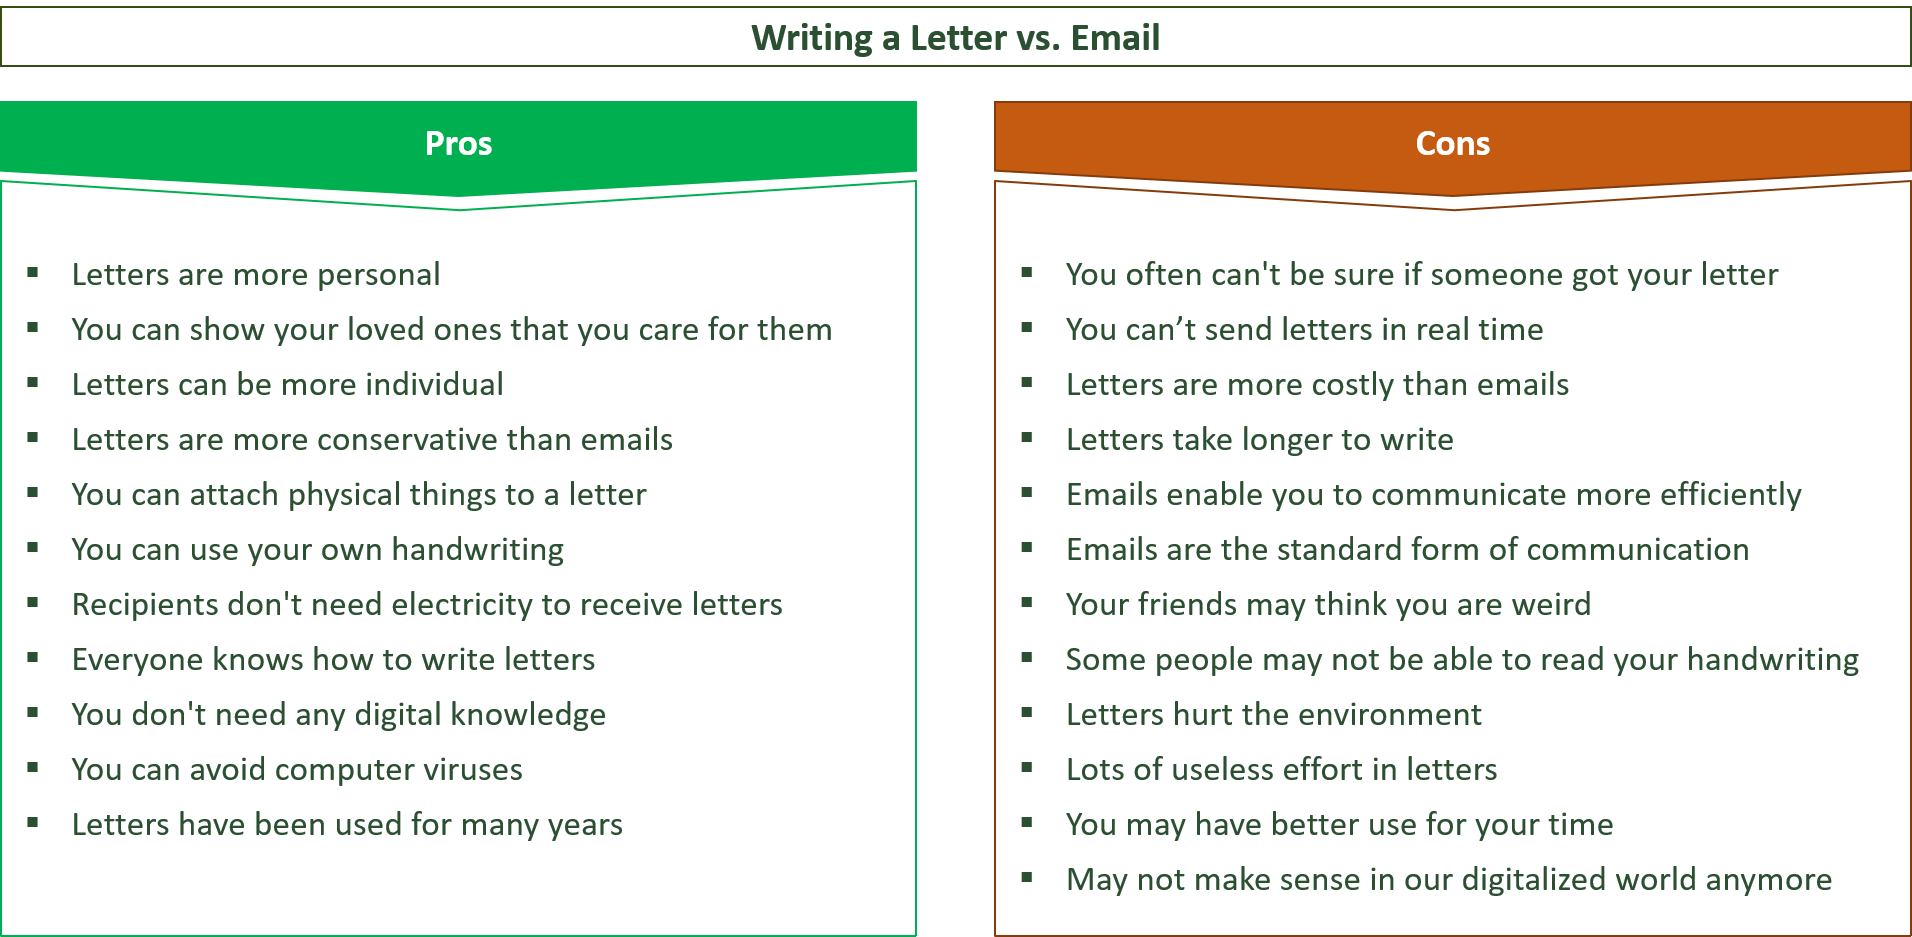 advantages and disadvantages of writing a letter vs email